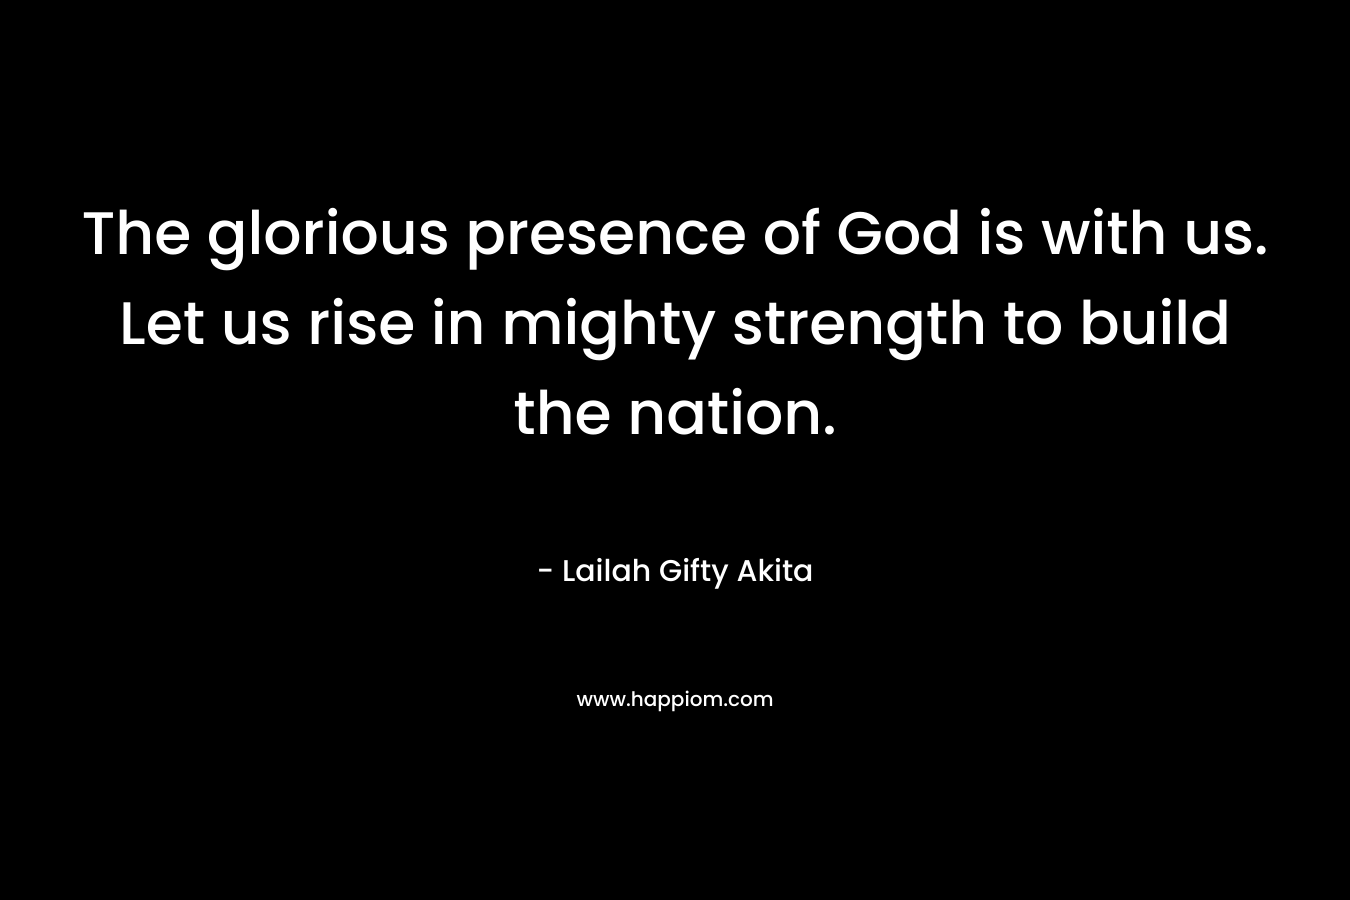 The glorious presence of God is with us. Let us rise in mighty strength to build the nation.